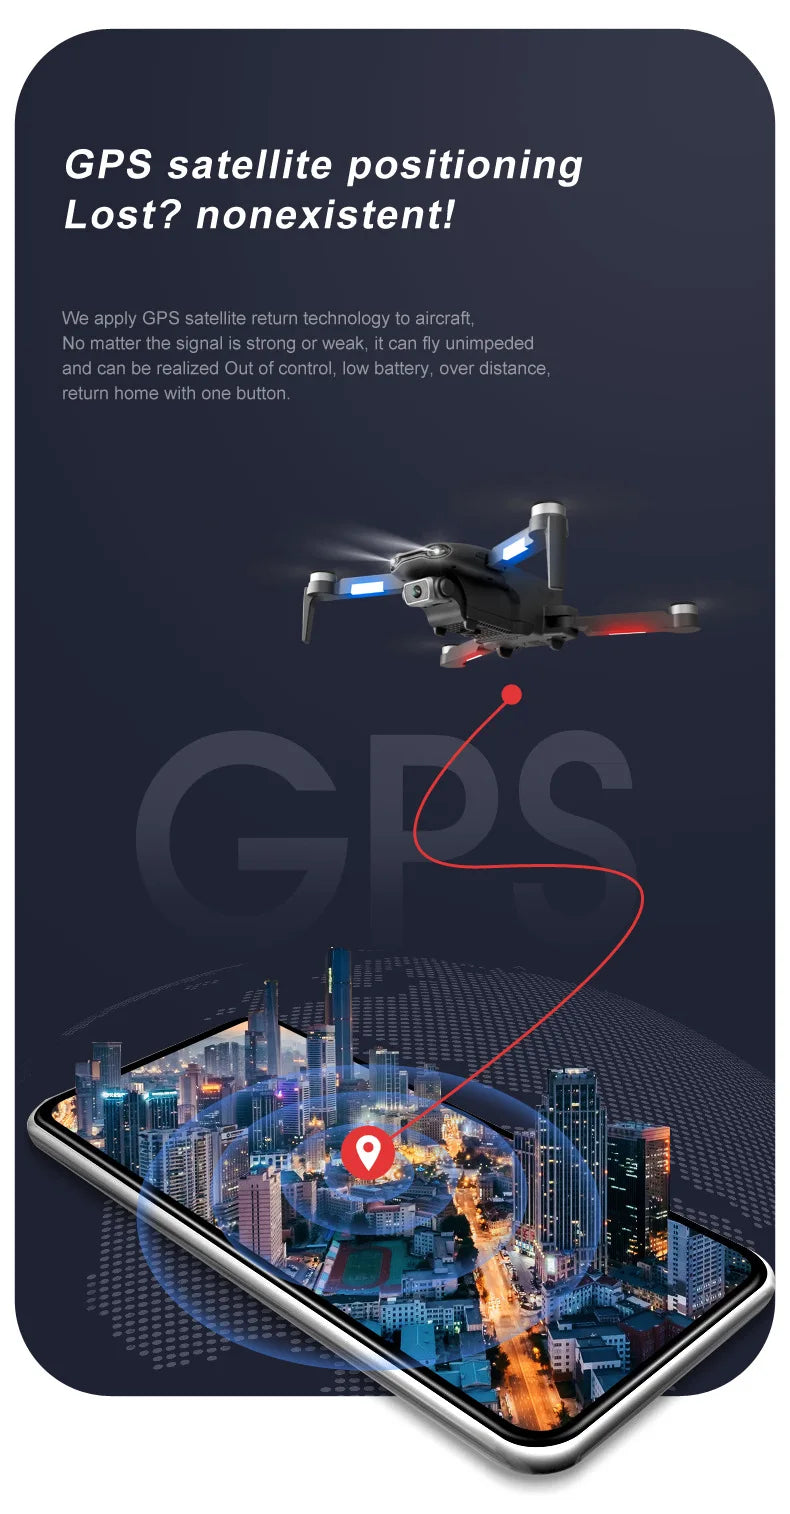 F9 drone, gps satellite return technology can fly unimpeded and can